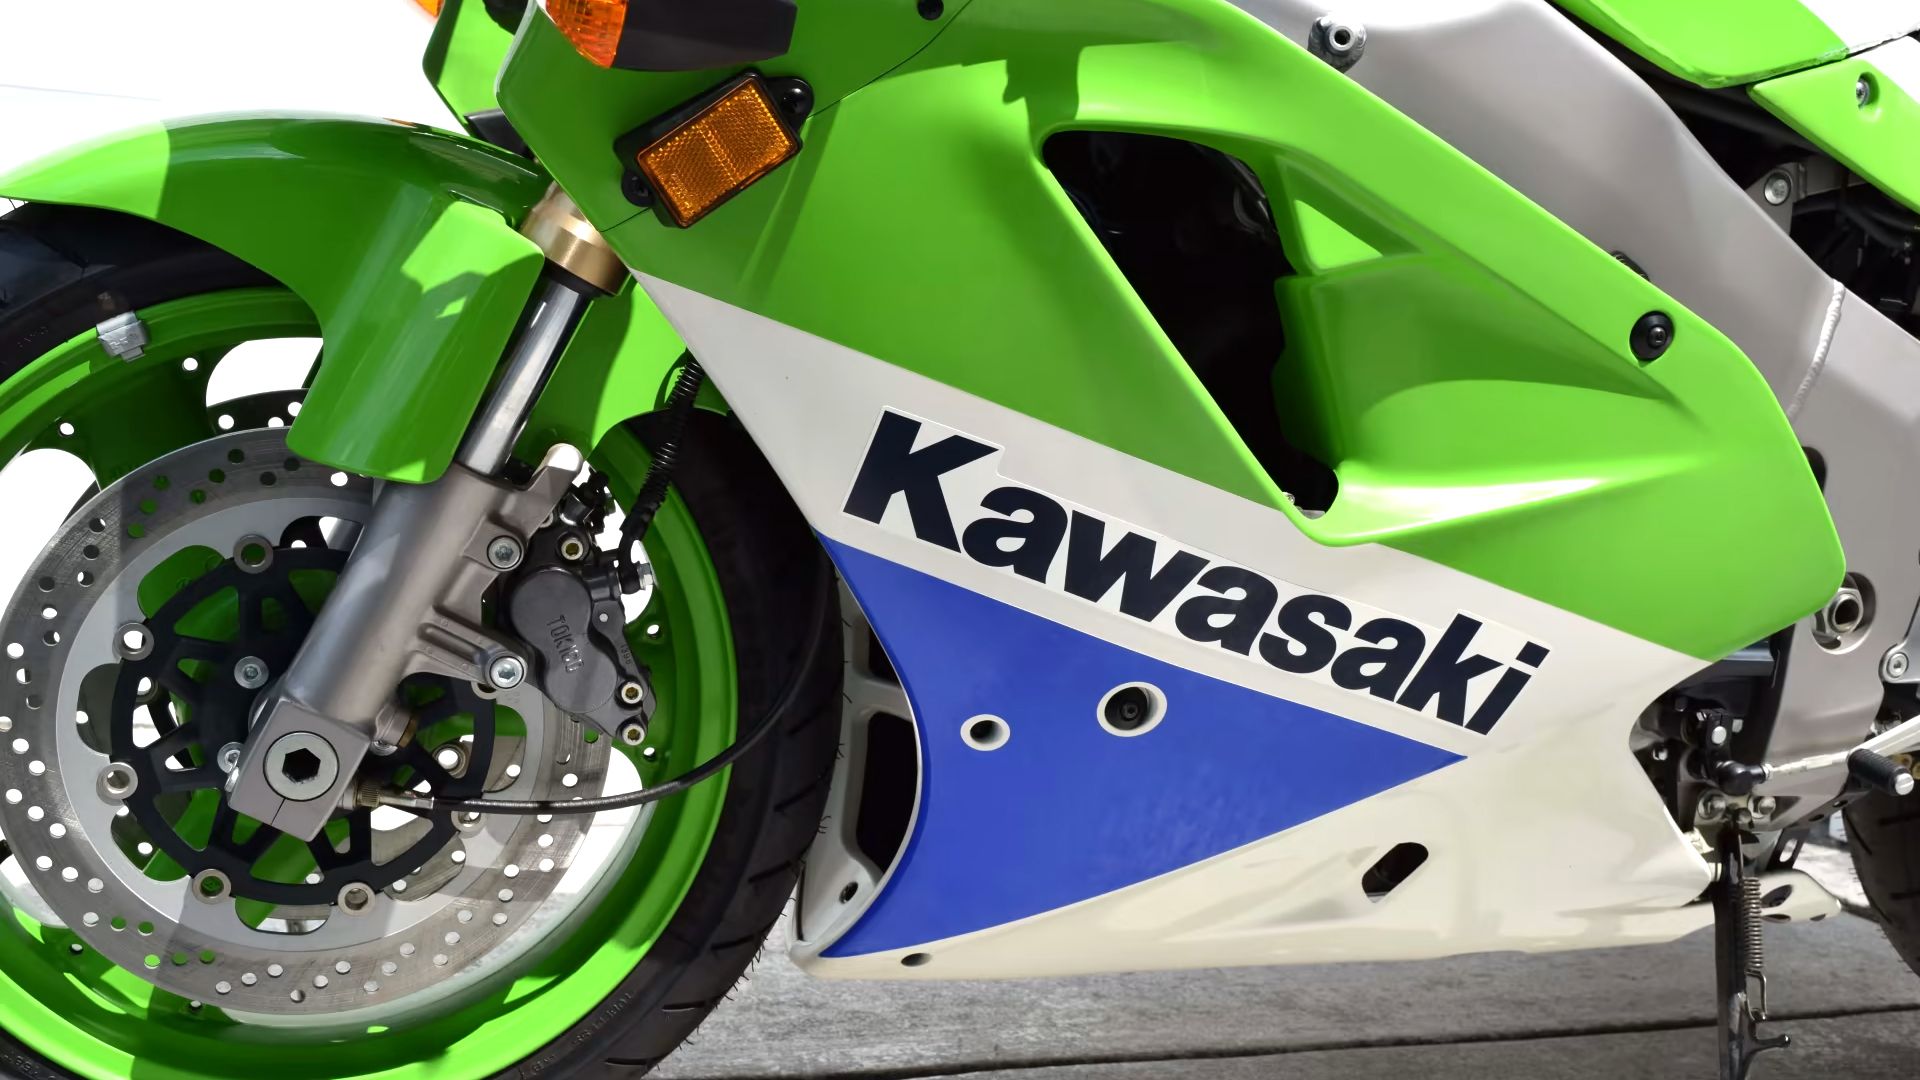 Why The Kawasaki ZX-7R Is A Symbol Of 90s Sport Bike Mastery